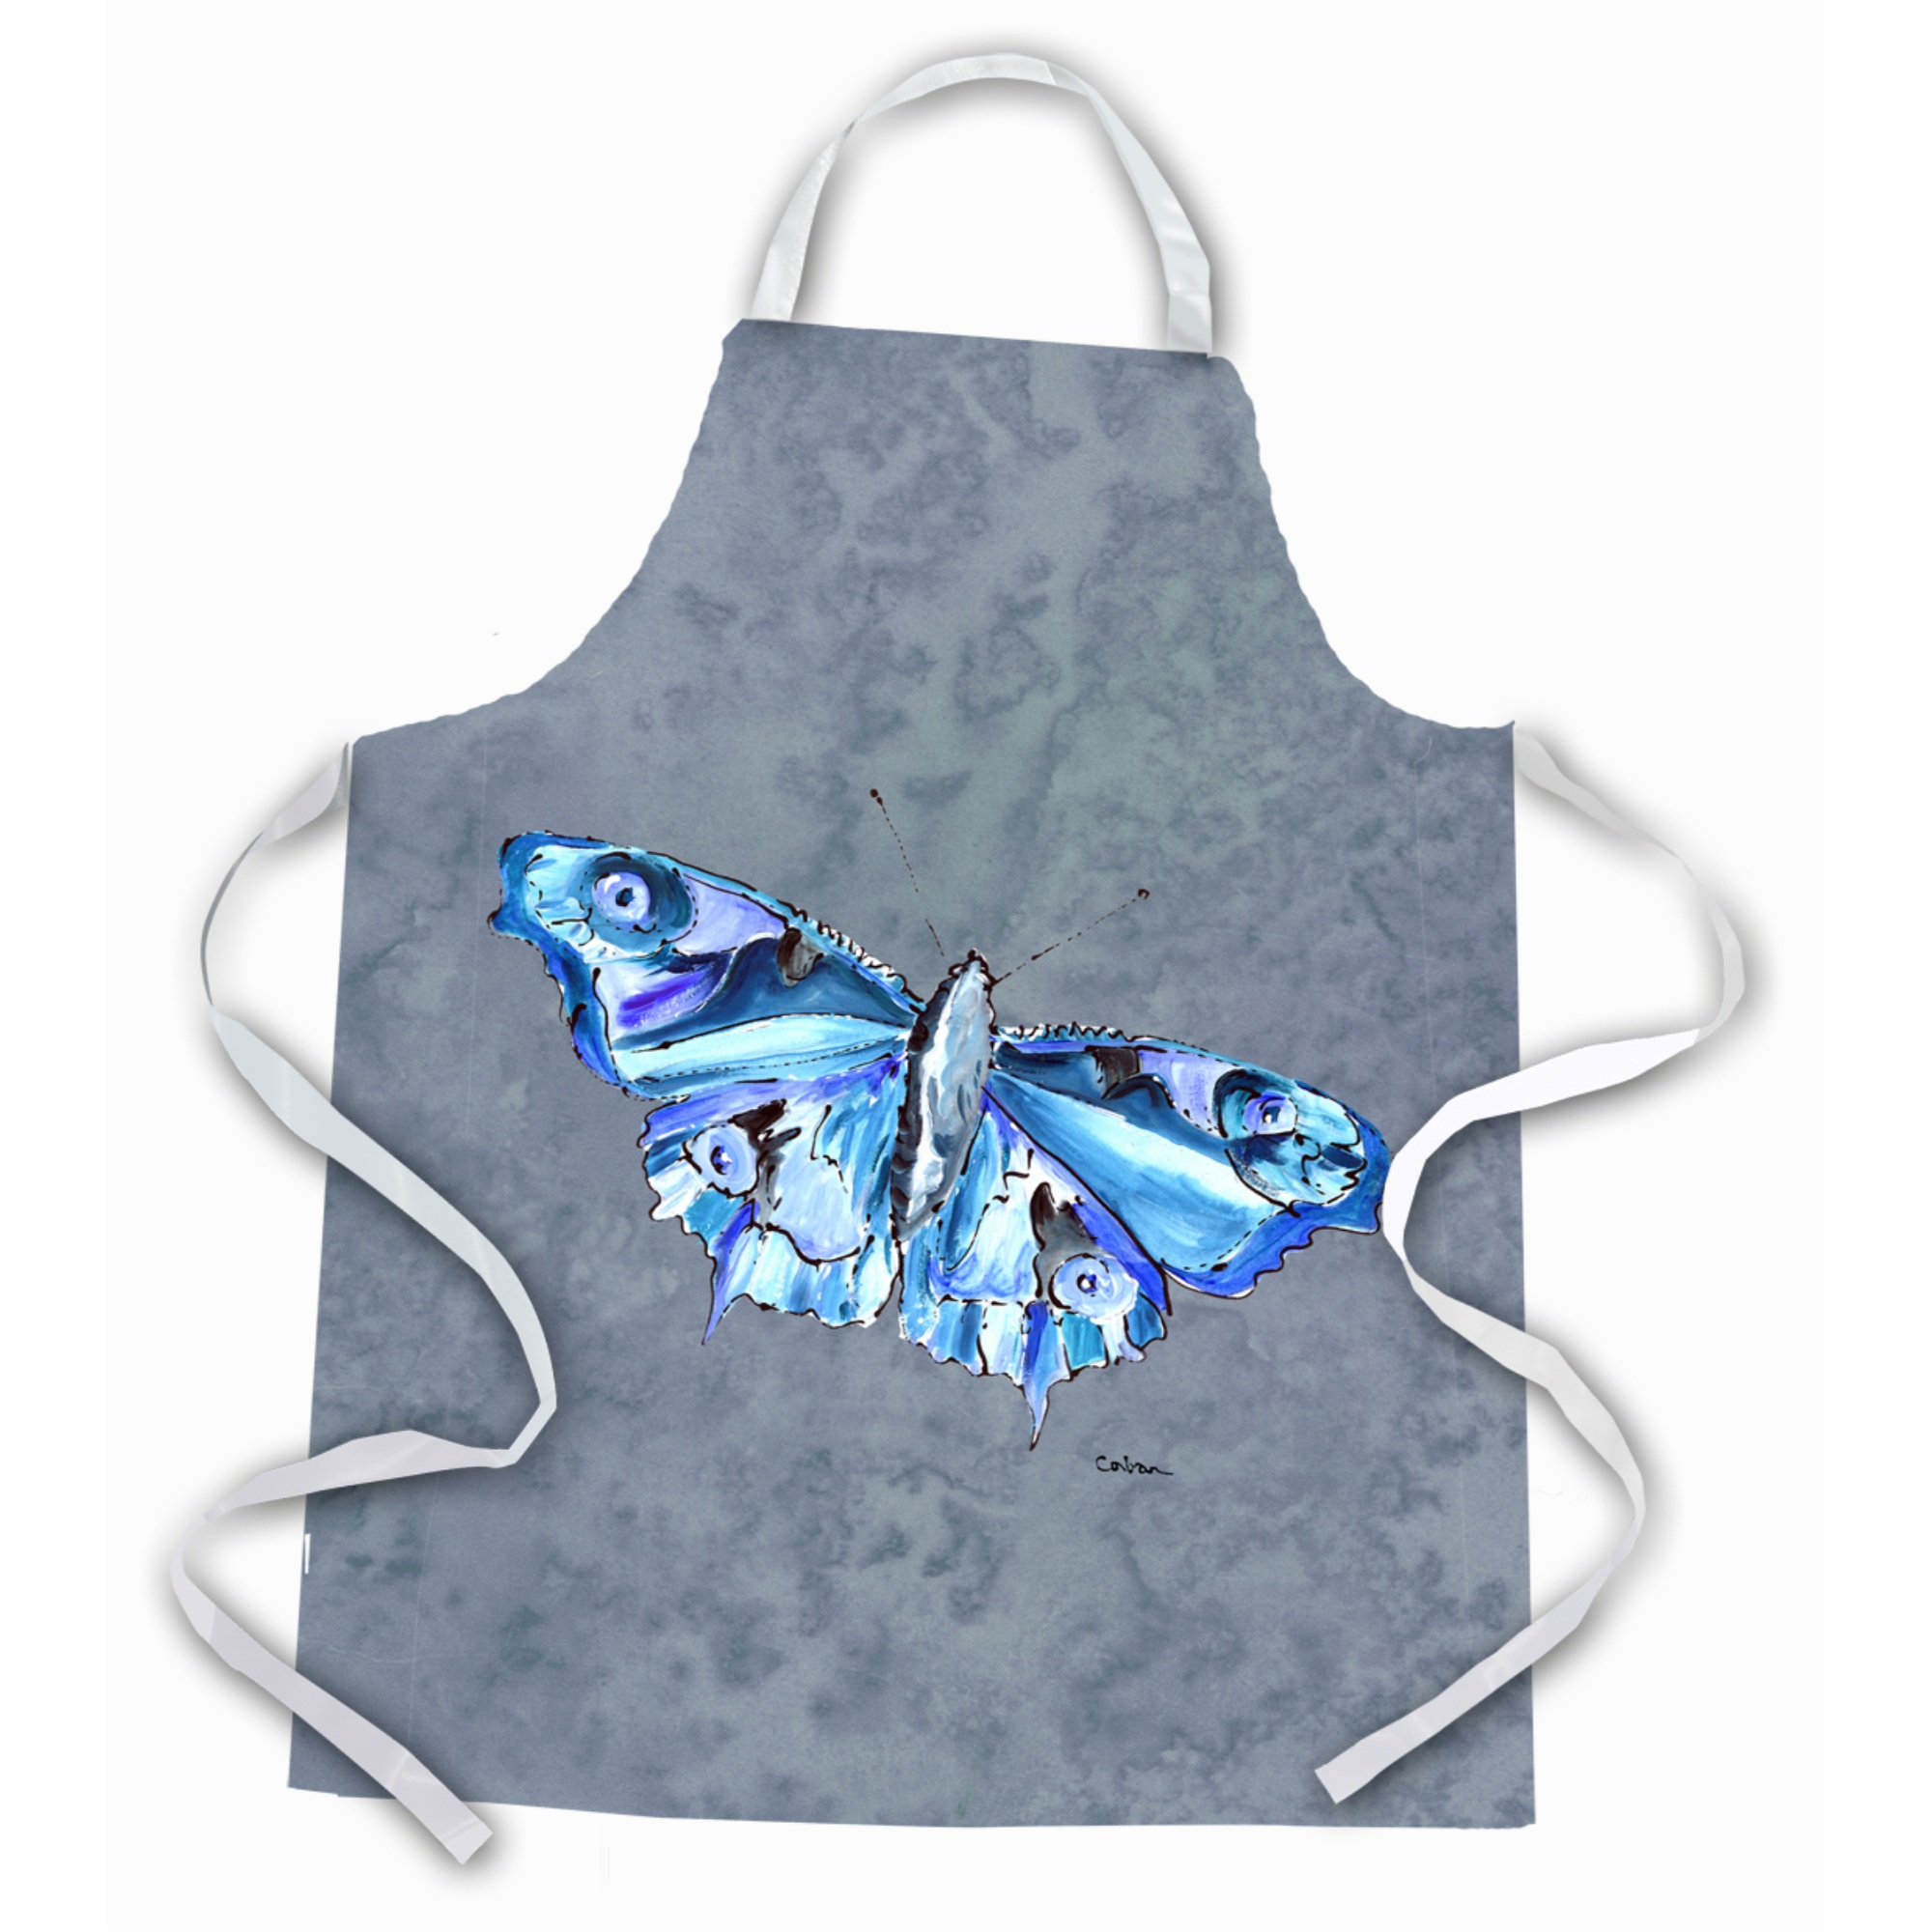 Caroline's Treasures 8856APRON Butterfly on Gray Apron, Large, Multicolor